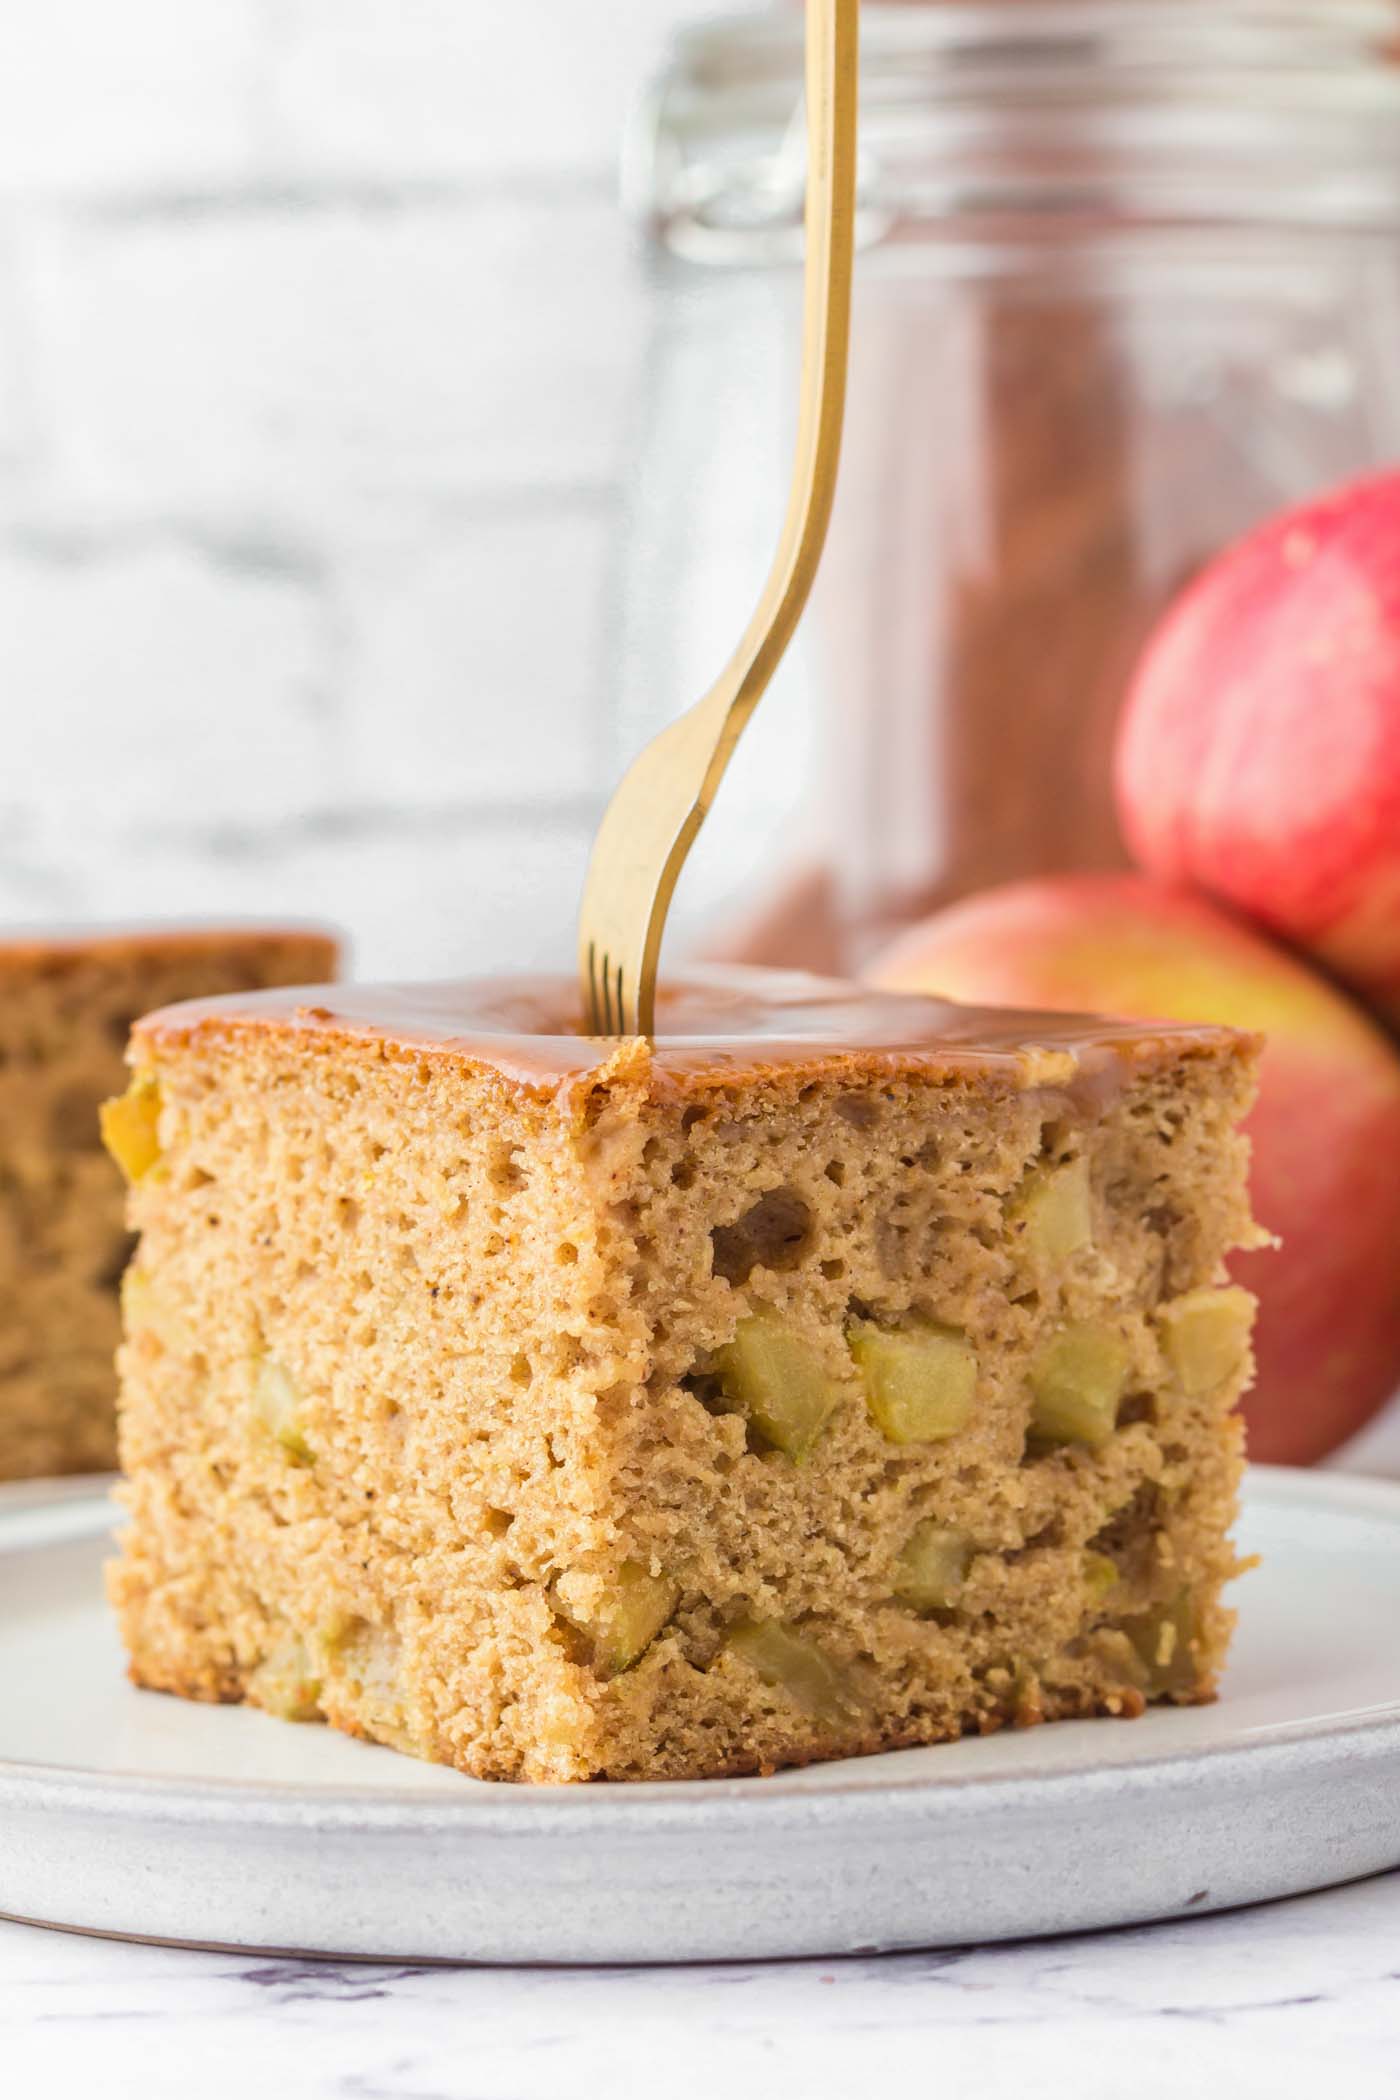 A large square of vegan apple cake on a plate. The cake is topped with a caramel glaze, there's a fork stuck in the cake and you can see some pieces of diced apple in the cake.